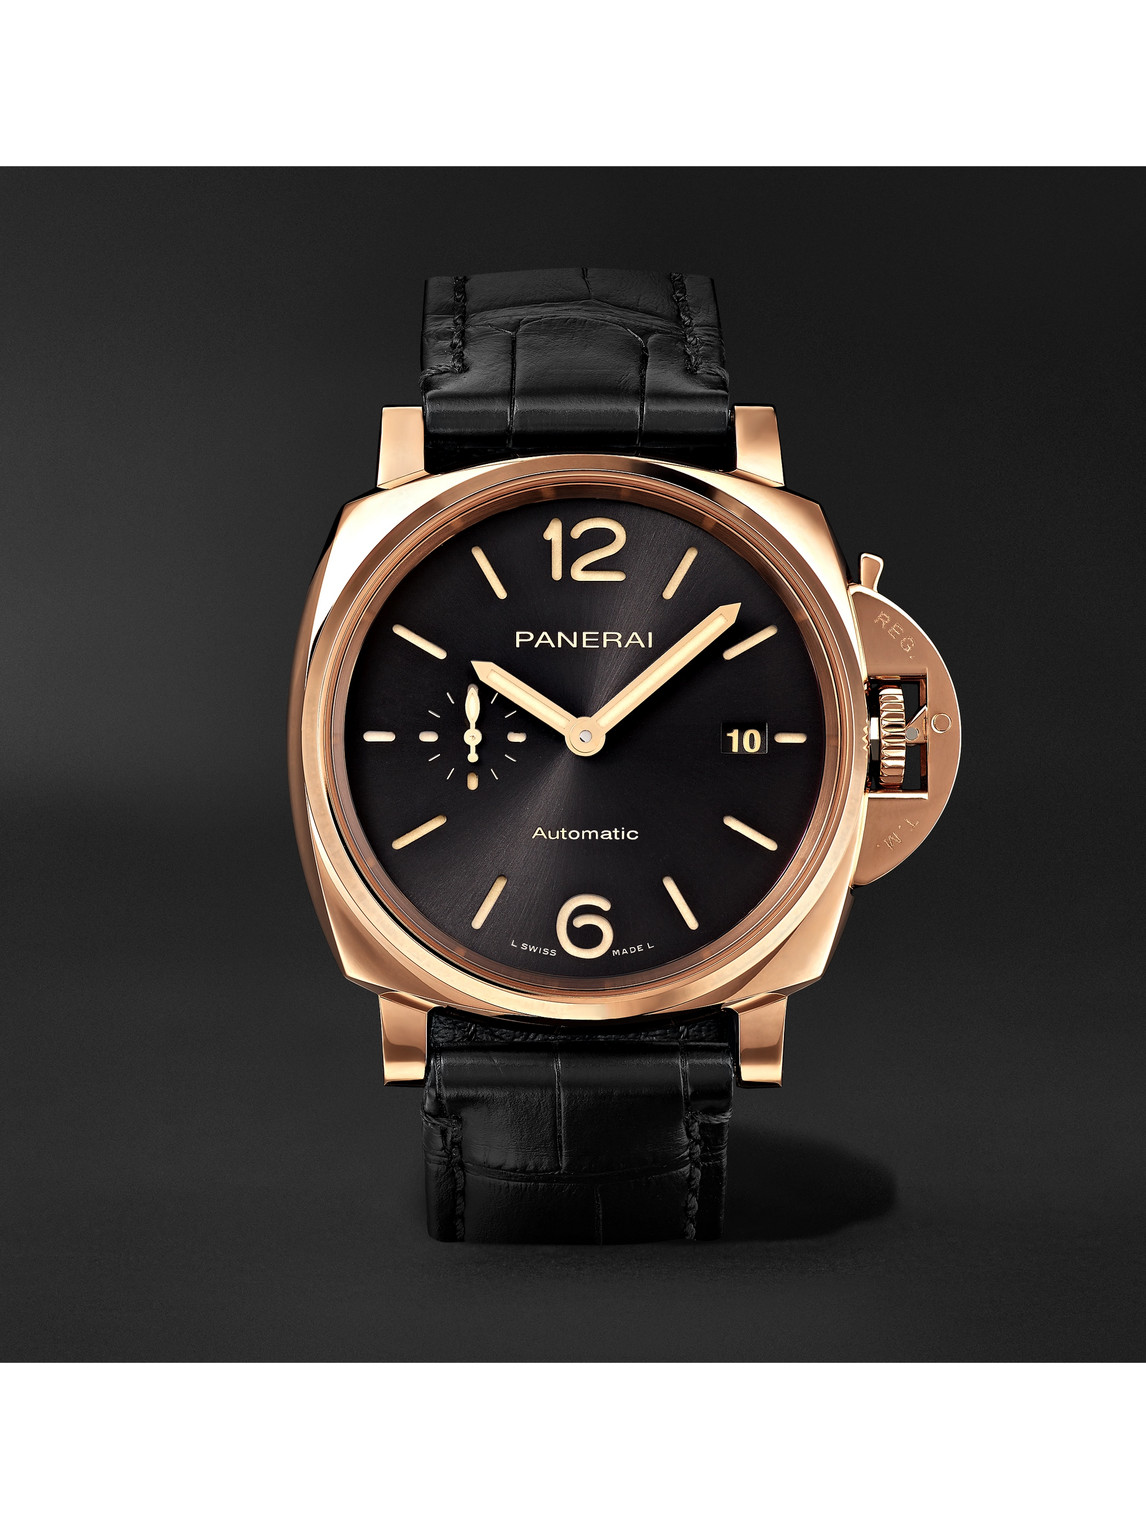 Panerai Luminor Due Automatic 42mm Goldtech And Alligator Watch, Ref. No. Pam01041 In Black